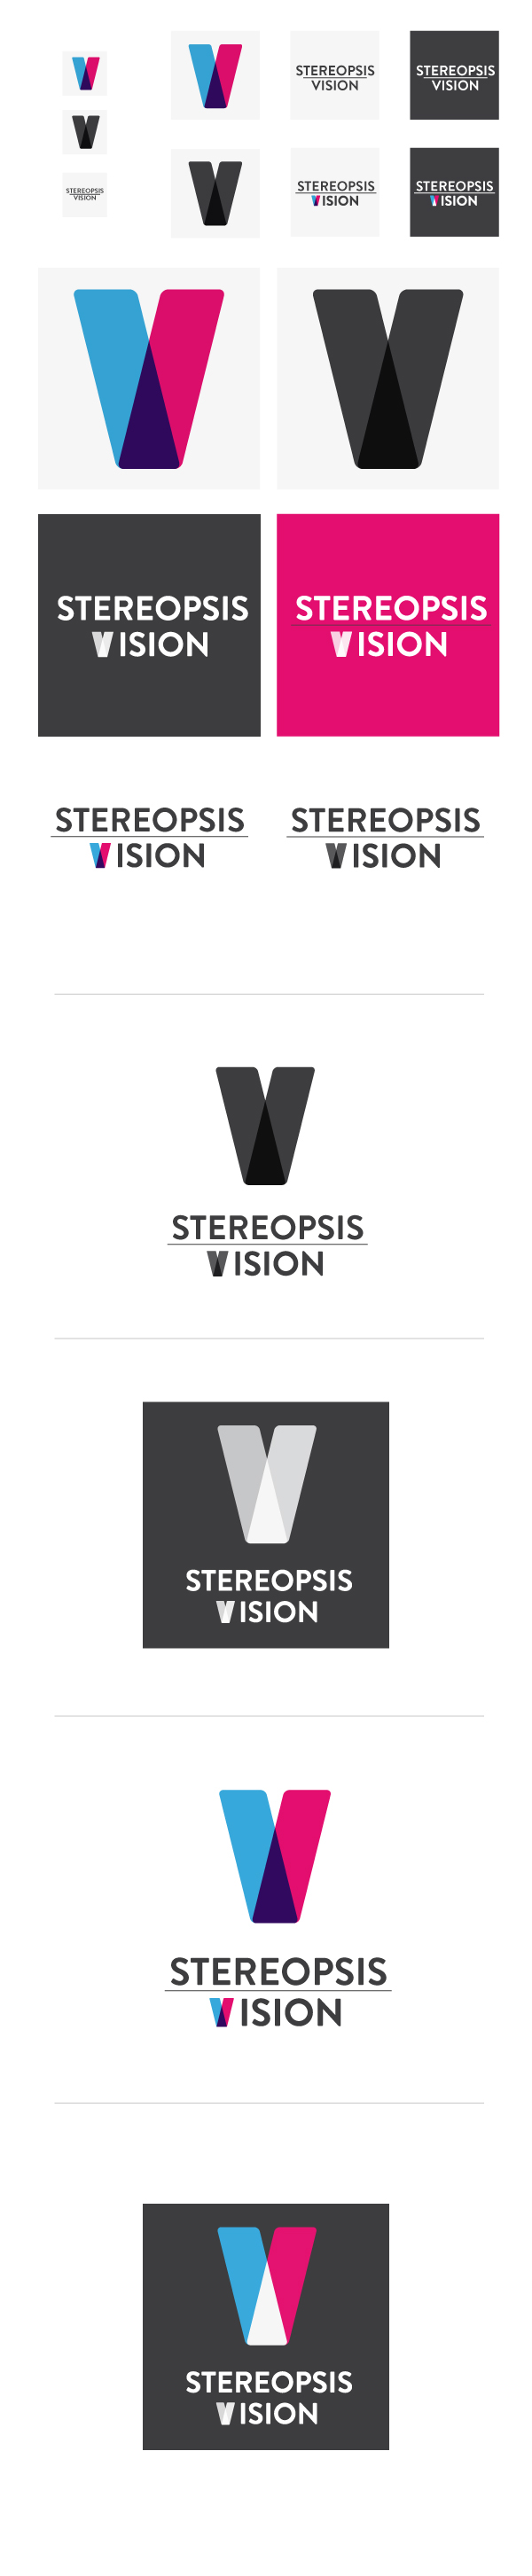 stereopsis vision stereo 3D glasses Cinema tv Movies films movie paolo bischi graphics future 2012